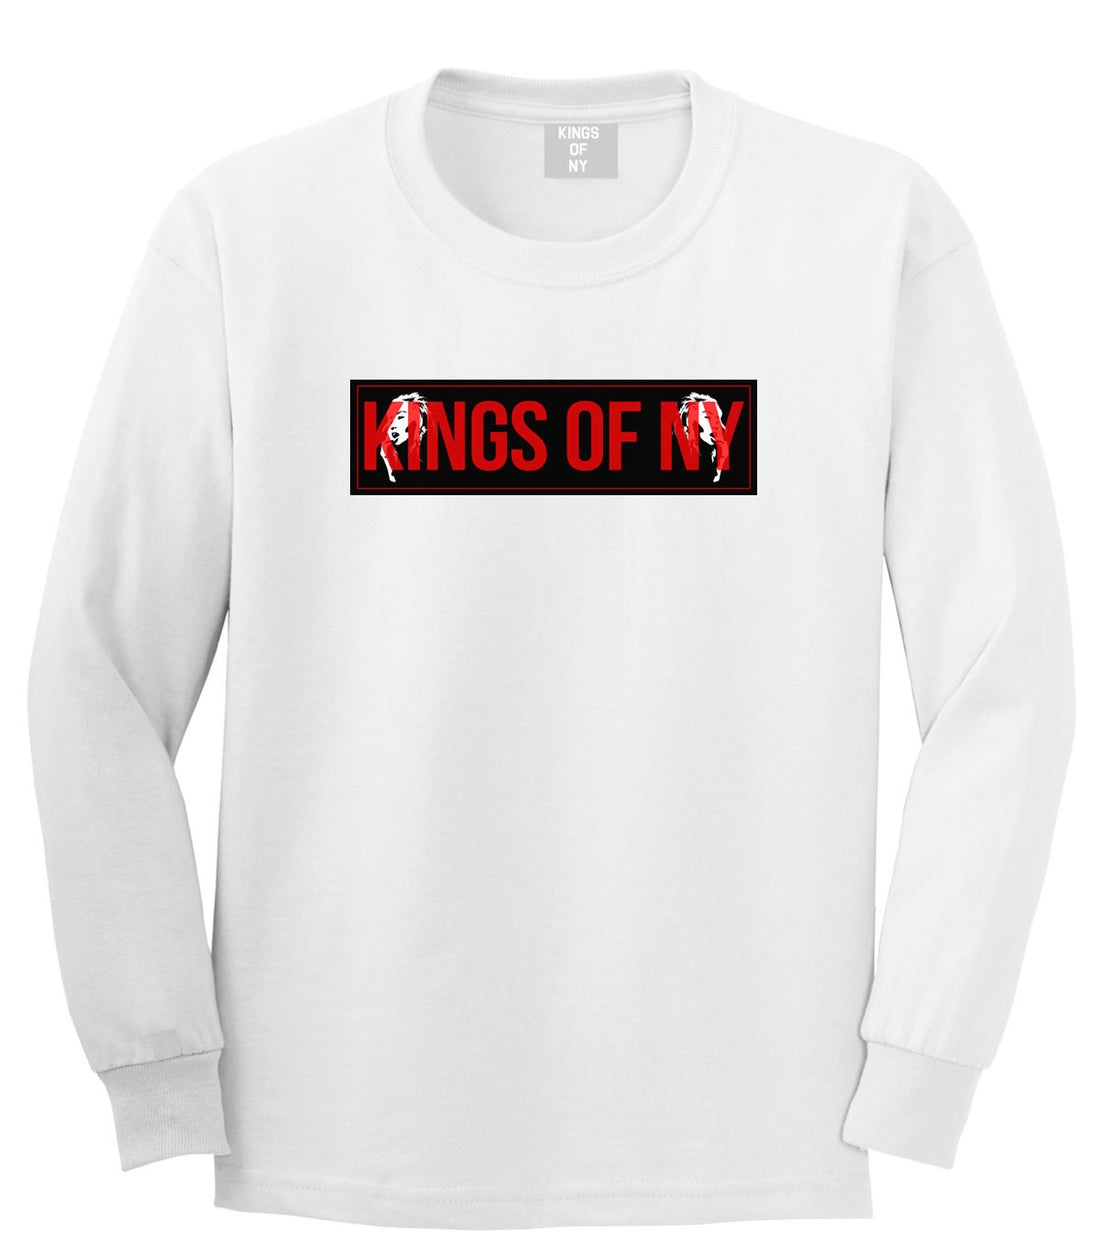 Red Girl Logo Print Boys Kids Long Sleeve T-Shirt in White by Kings Of NY